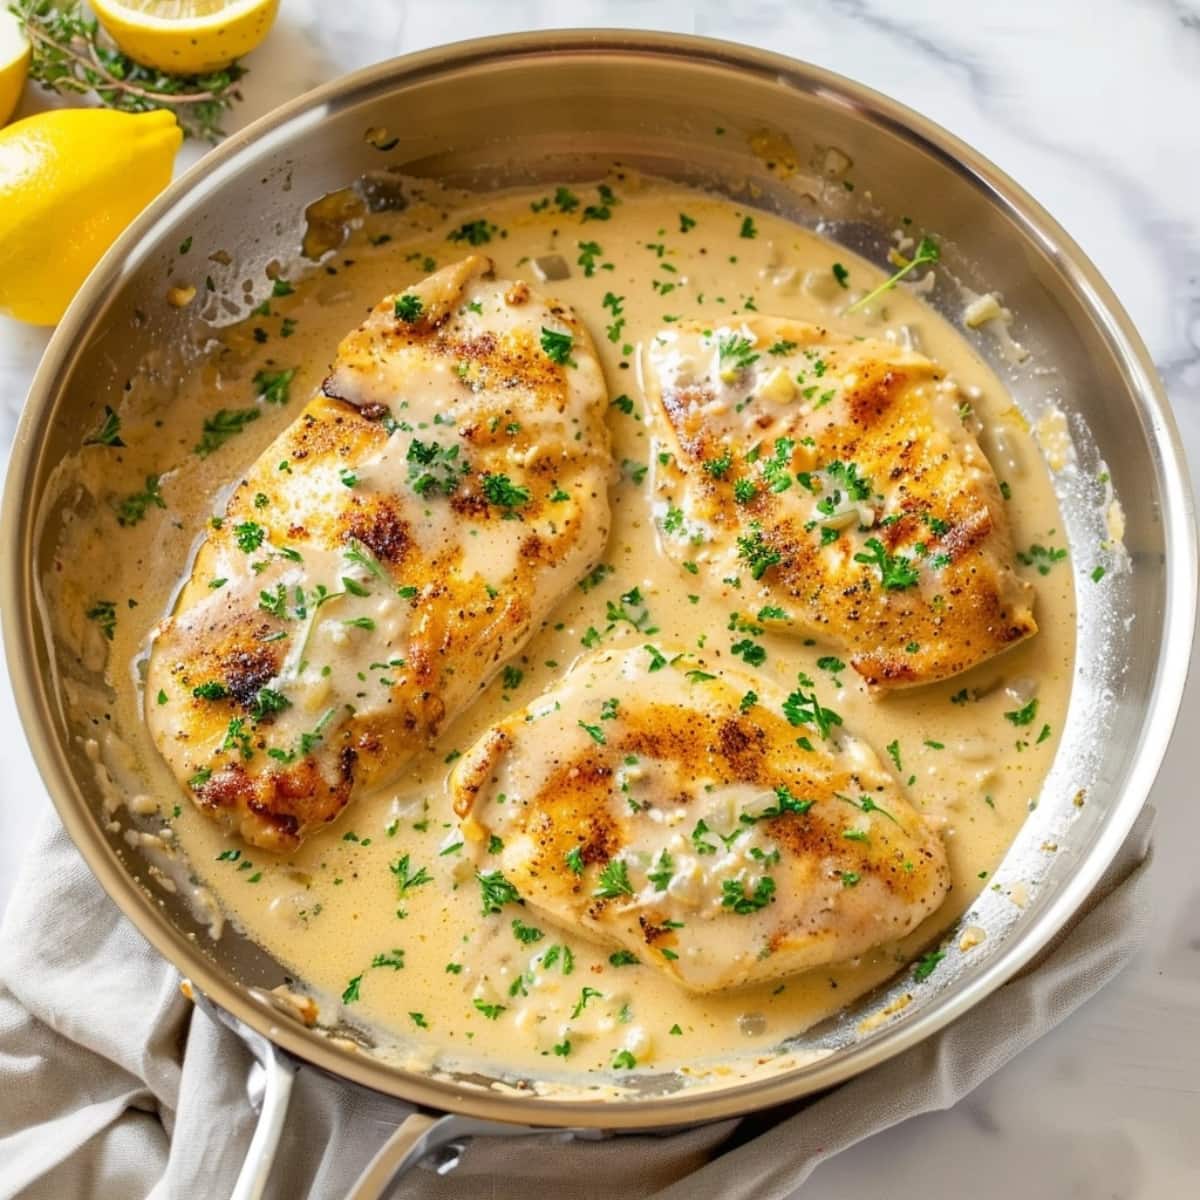 Chicken breasts with lemon garlic sauce garnished with chopped parsley.